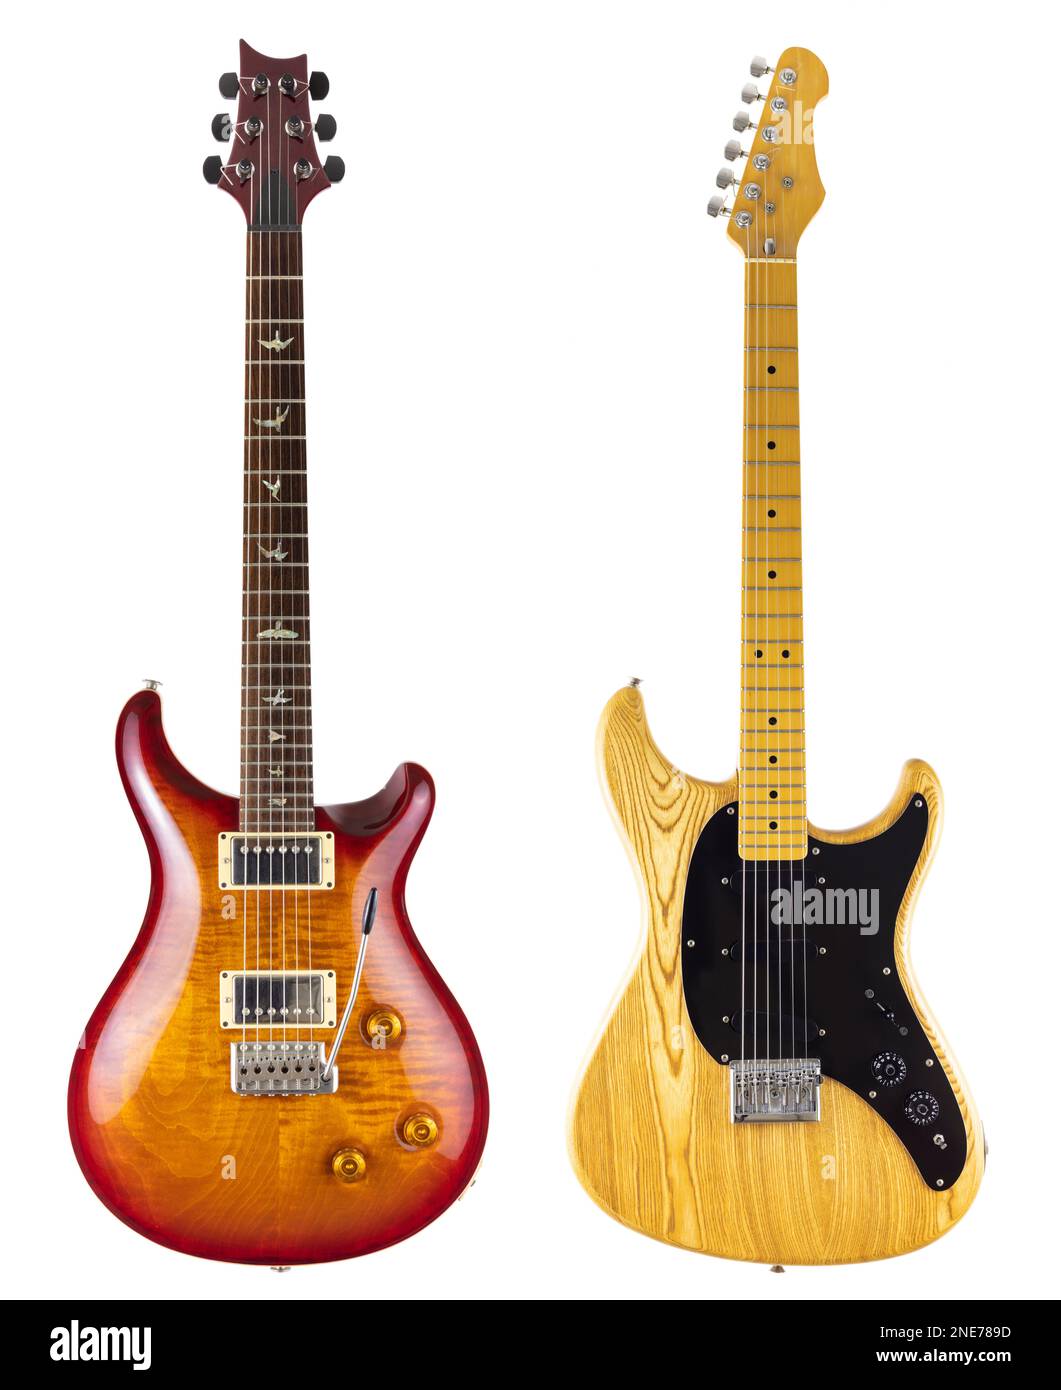 Guitars Two guitars Two Electric Guitars cut out Guitars white background PRS custom 22 guitar Ibanez Blazer electric guitar Two guitars Stock Photo